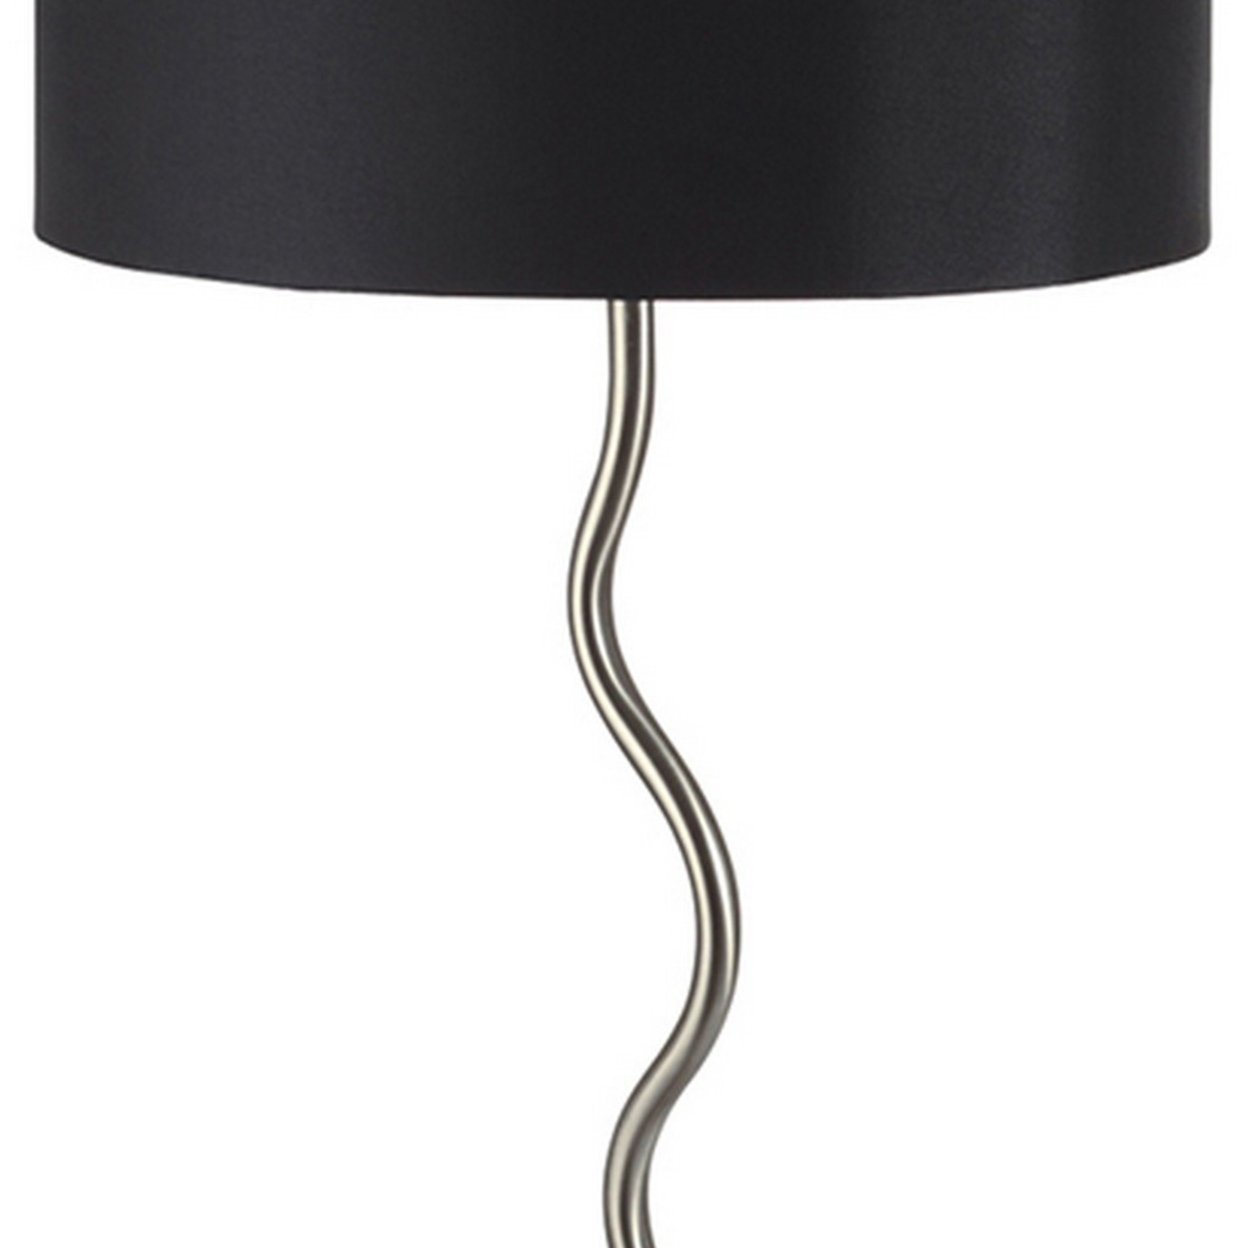 Table Lamp With Curved Tubular Body And Round Base, Black- Saltoro Sherpi